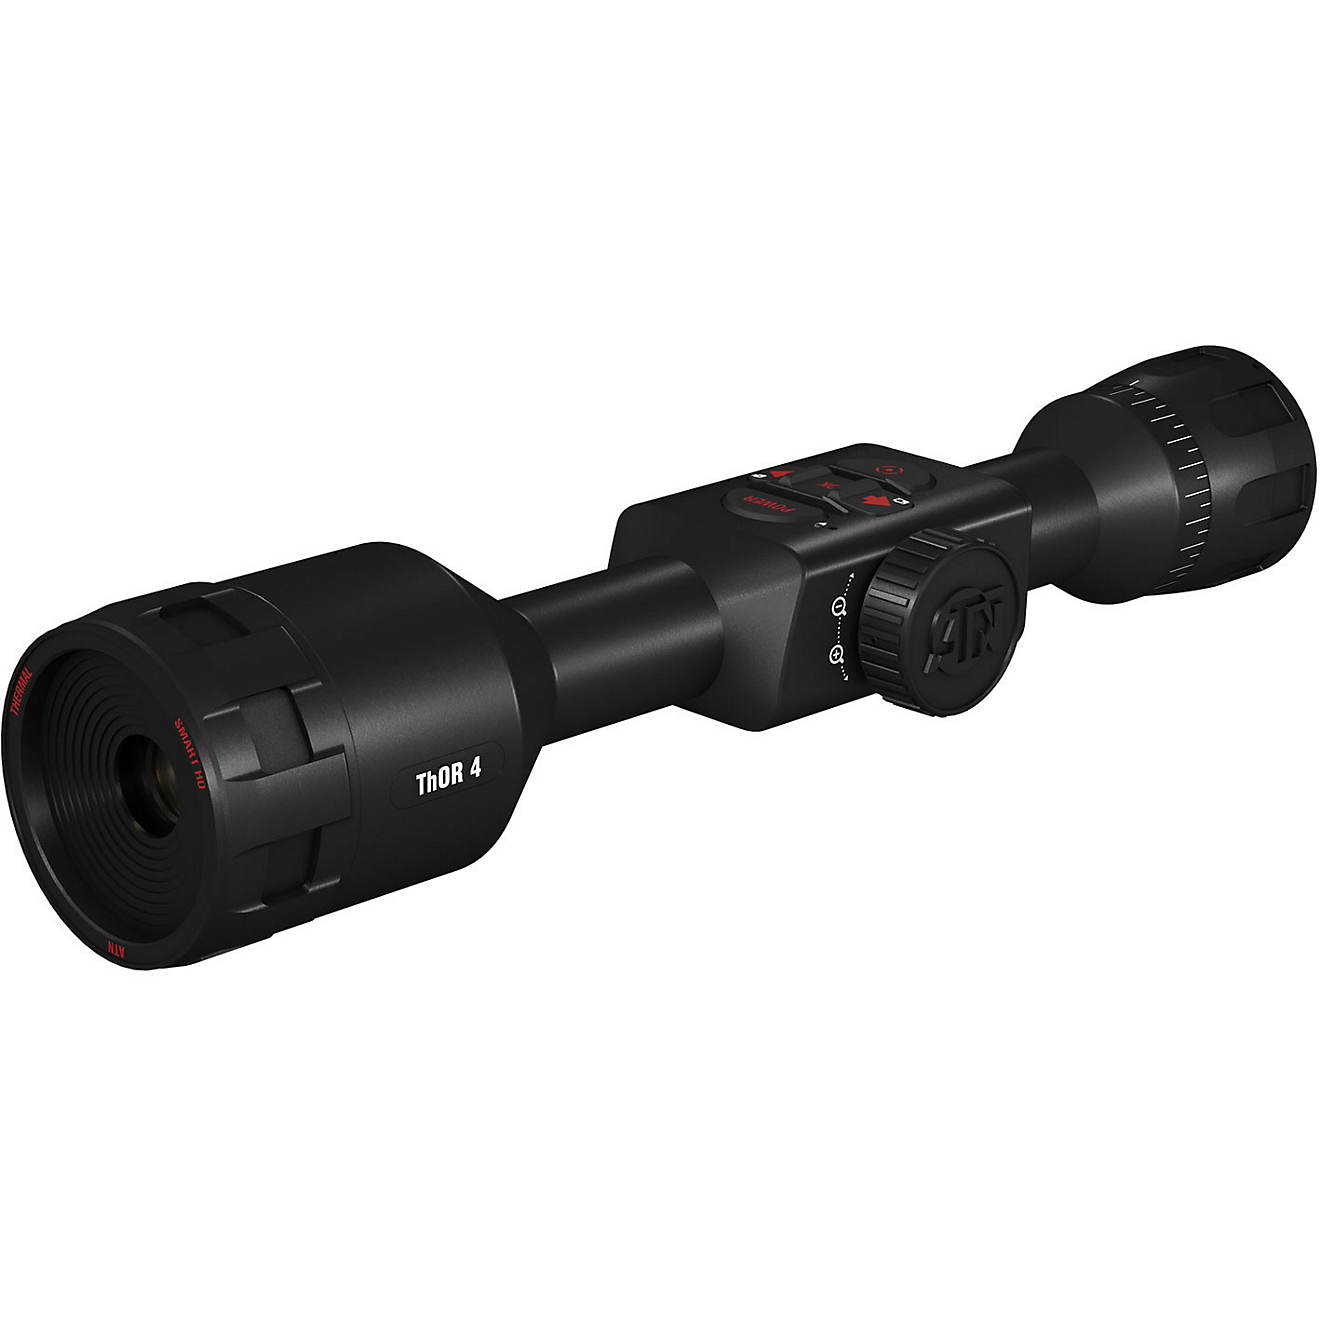 ATN Thor 4 384 HD 2 - 8 x 25 Thermal Riflescope                                                                                  - view number 1